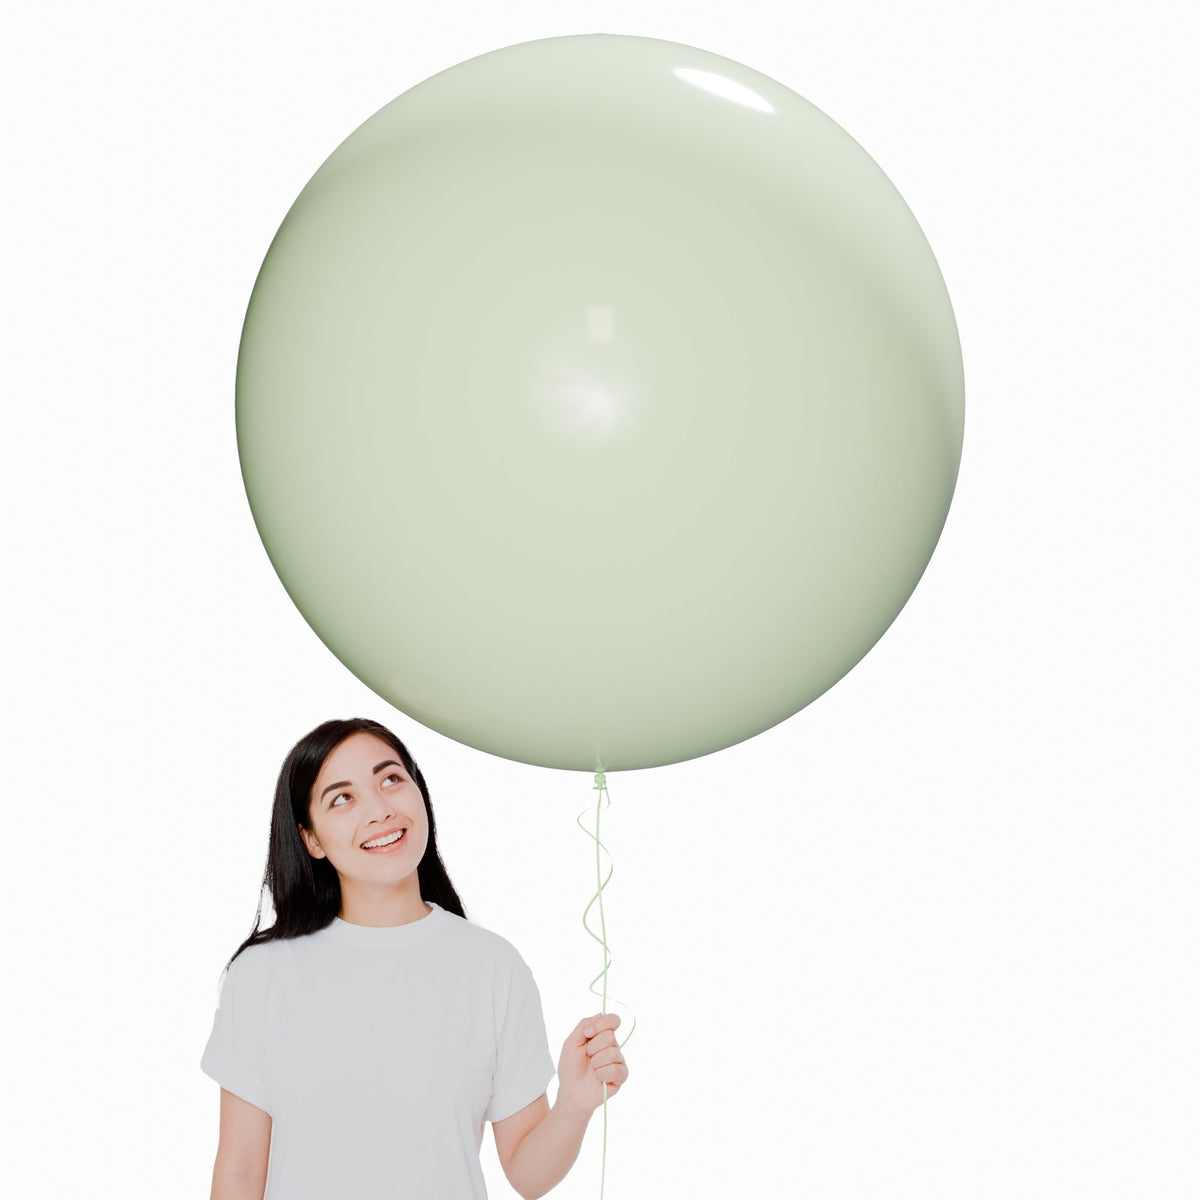 WIDE OCEAN INTERNATIONAL TRADE BEIJING CO., LTD Balloons Green Latex Balloon 36 Inches, Macaroon Collection, 2 Count 810064198946